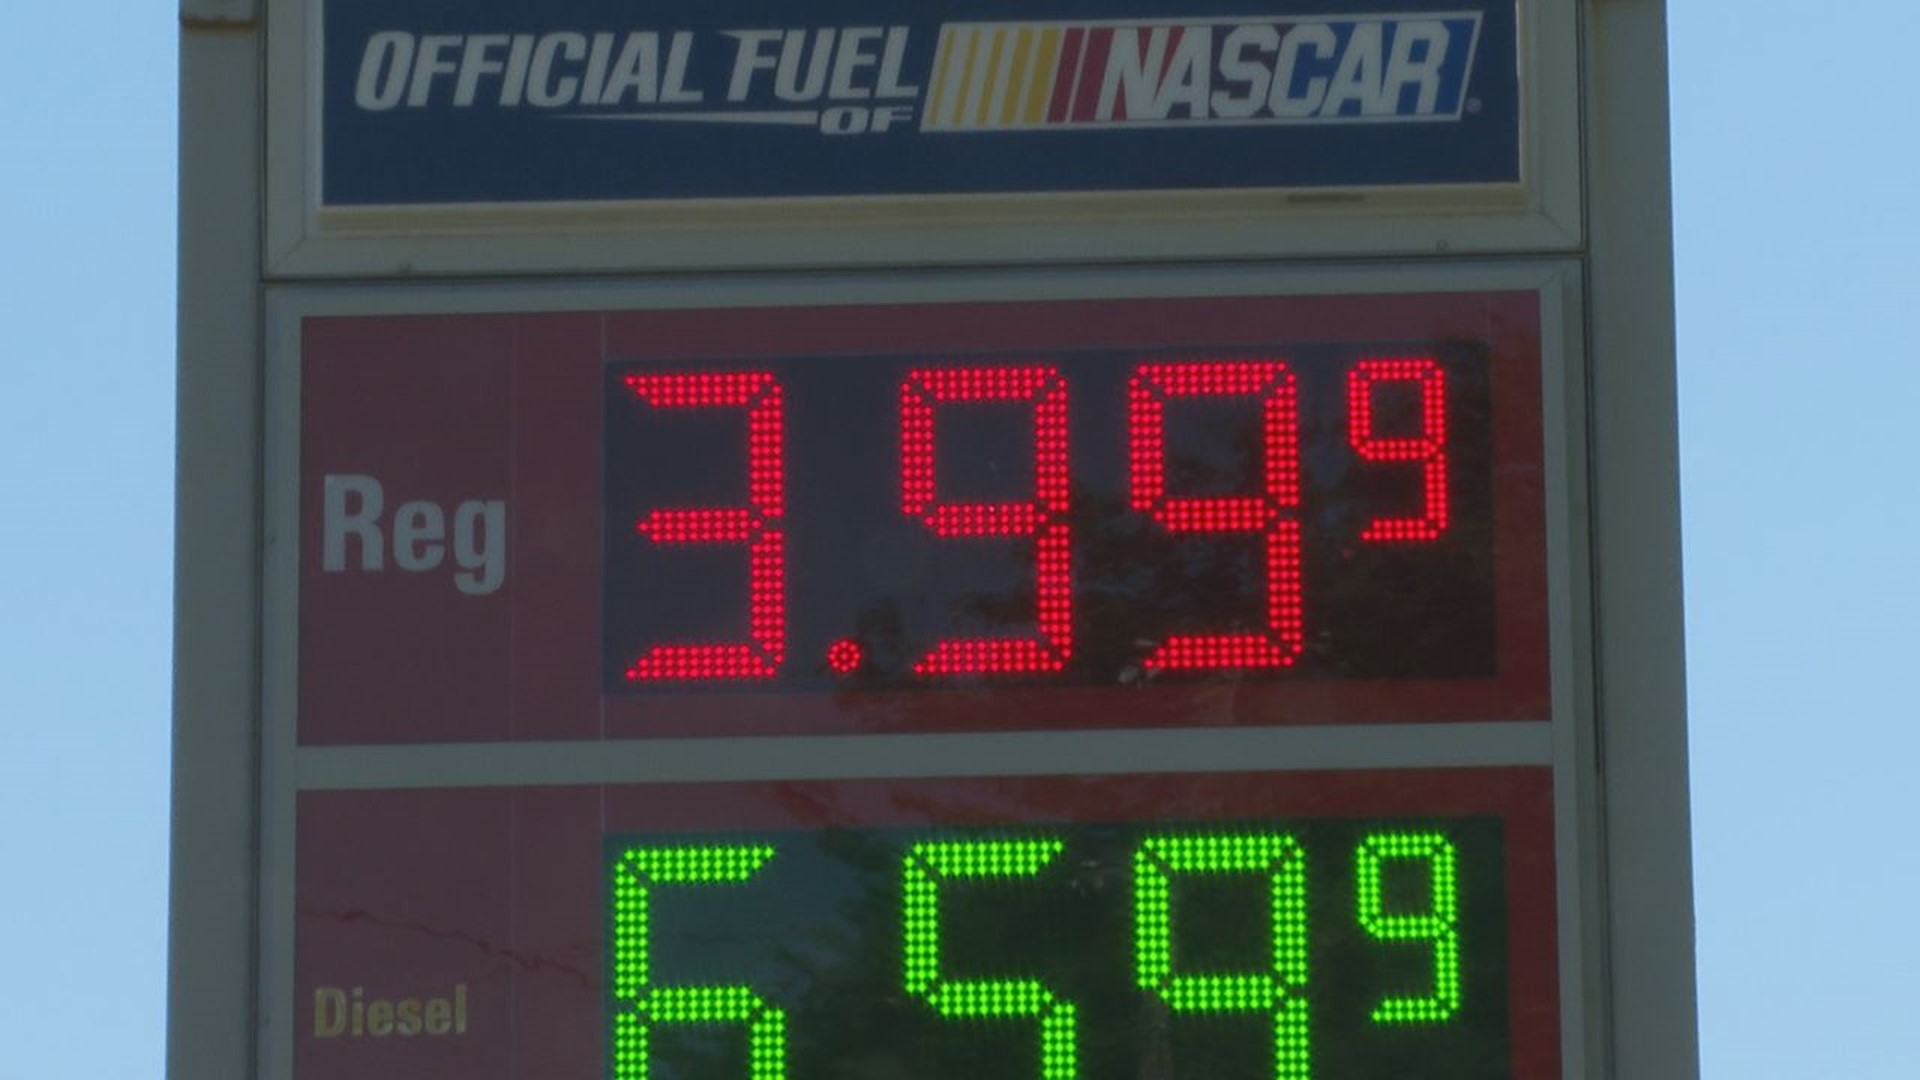 The gas station was helping drivers traveling during the 4th of July, by lowering its prices to help ease the pain at the pump for four hours only.